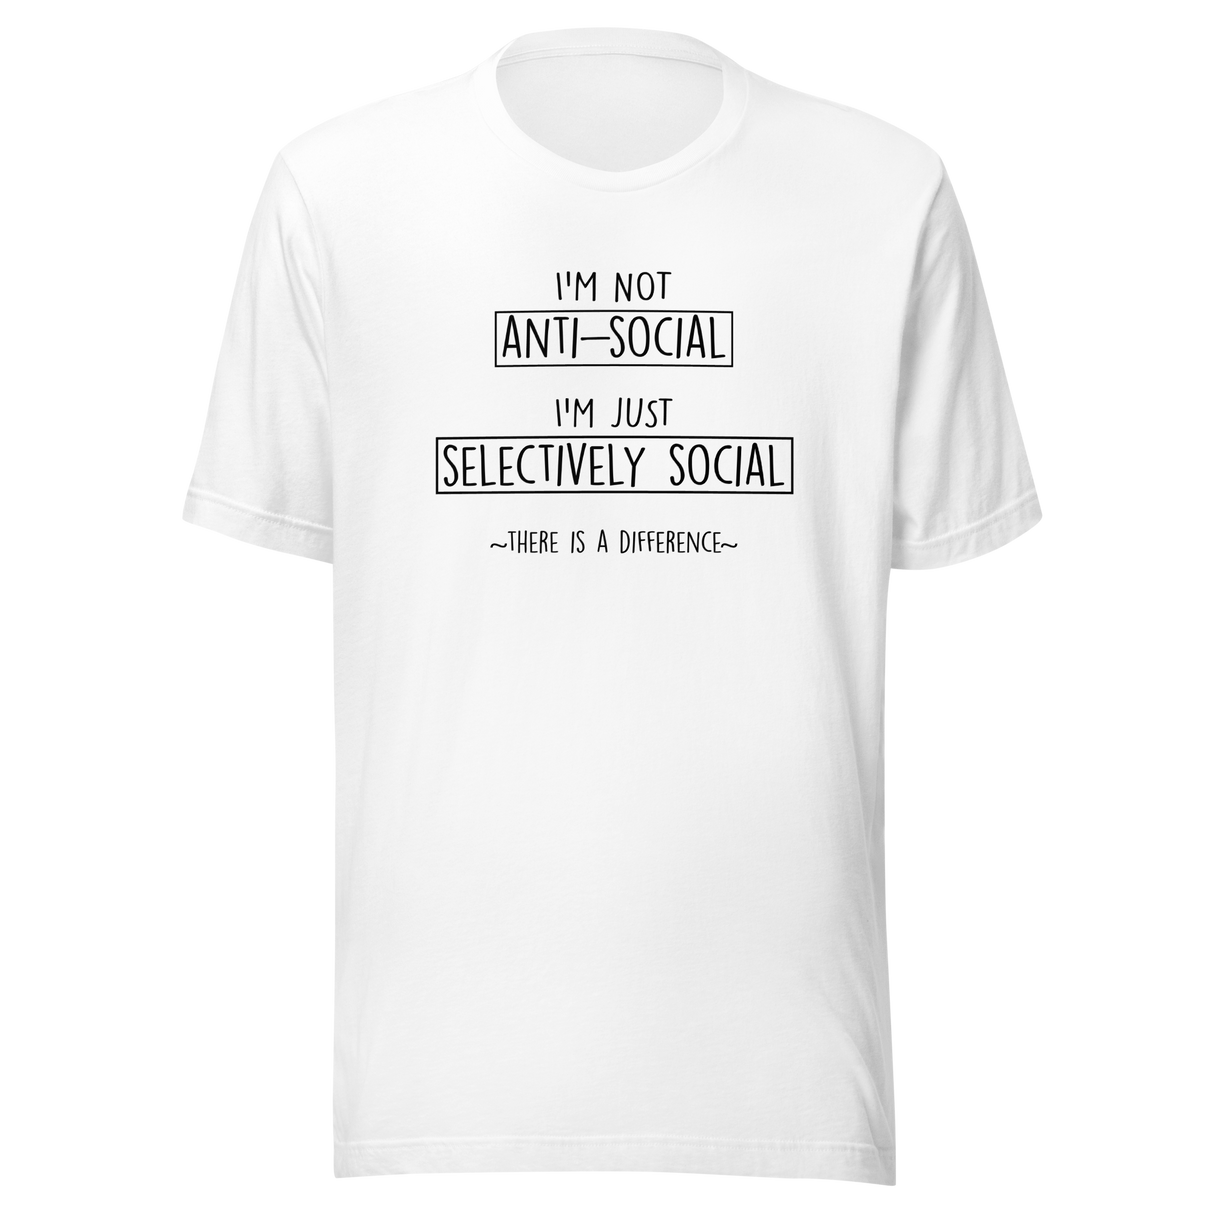 im-not-anti-social-i-am-selectively-social-there-is-a-difference-nerd-tee-anti-t-shirt-funny-tee-shy-t-shirt-humor-tee#color_white